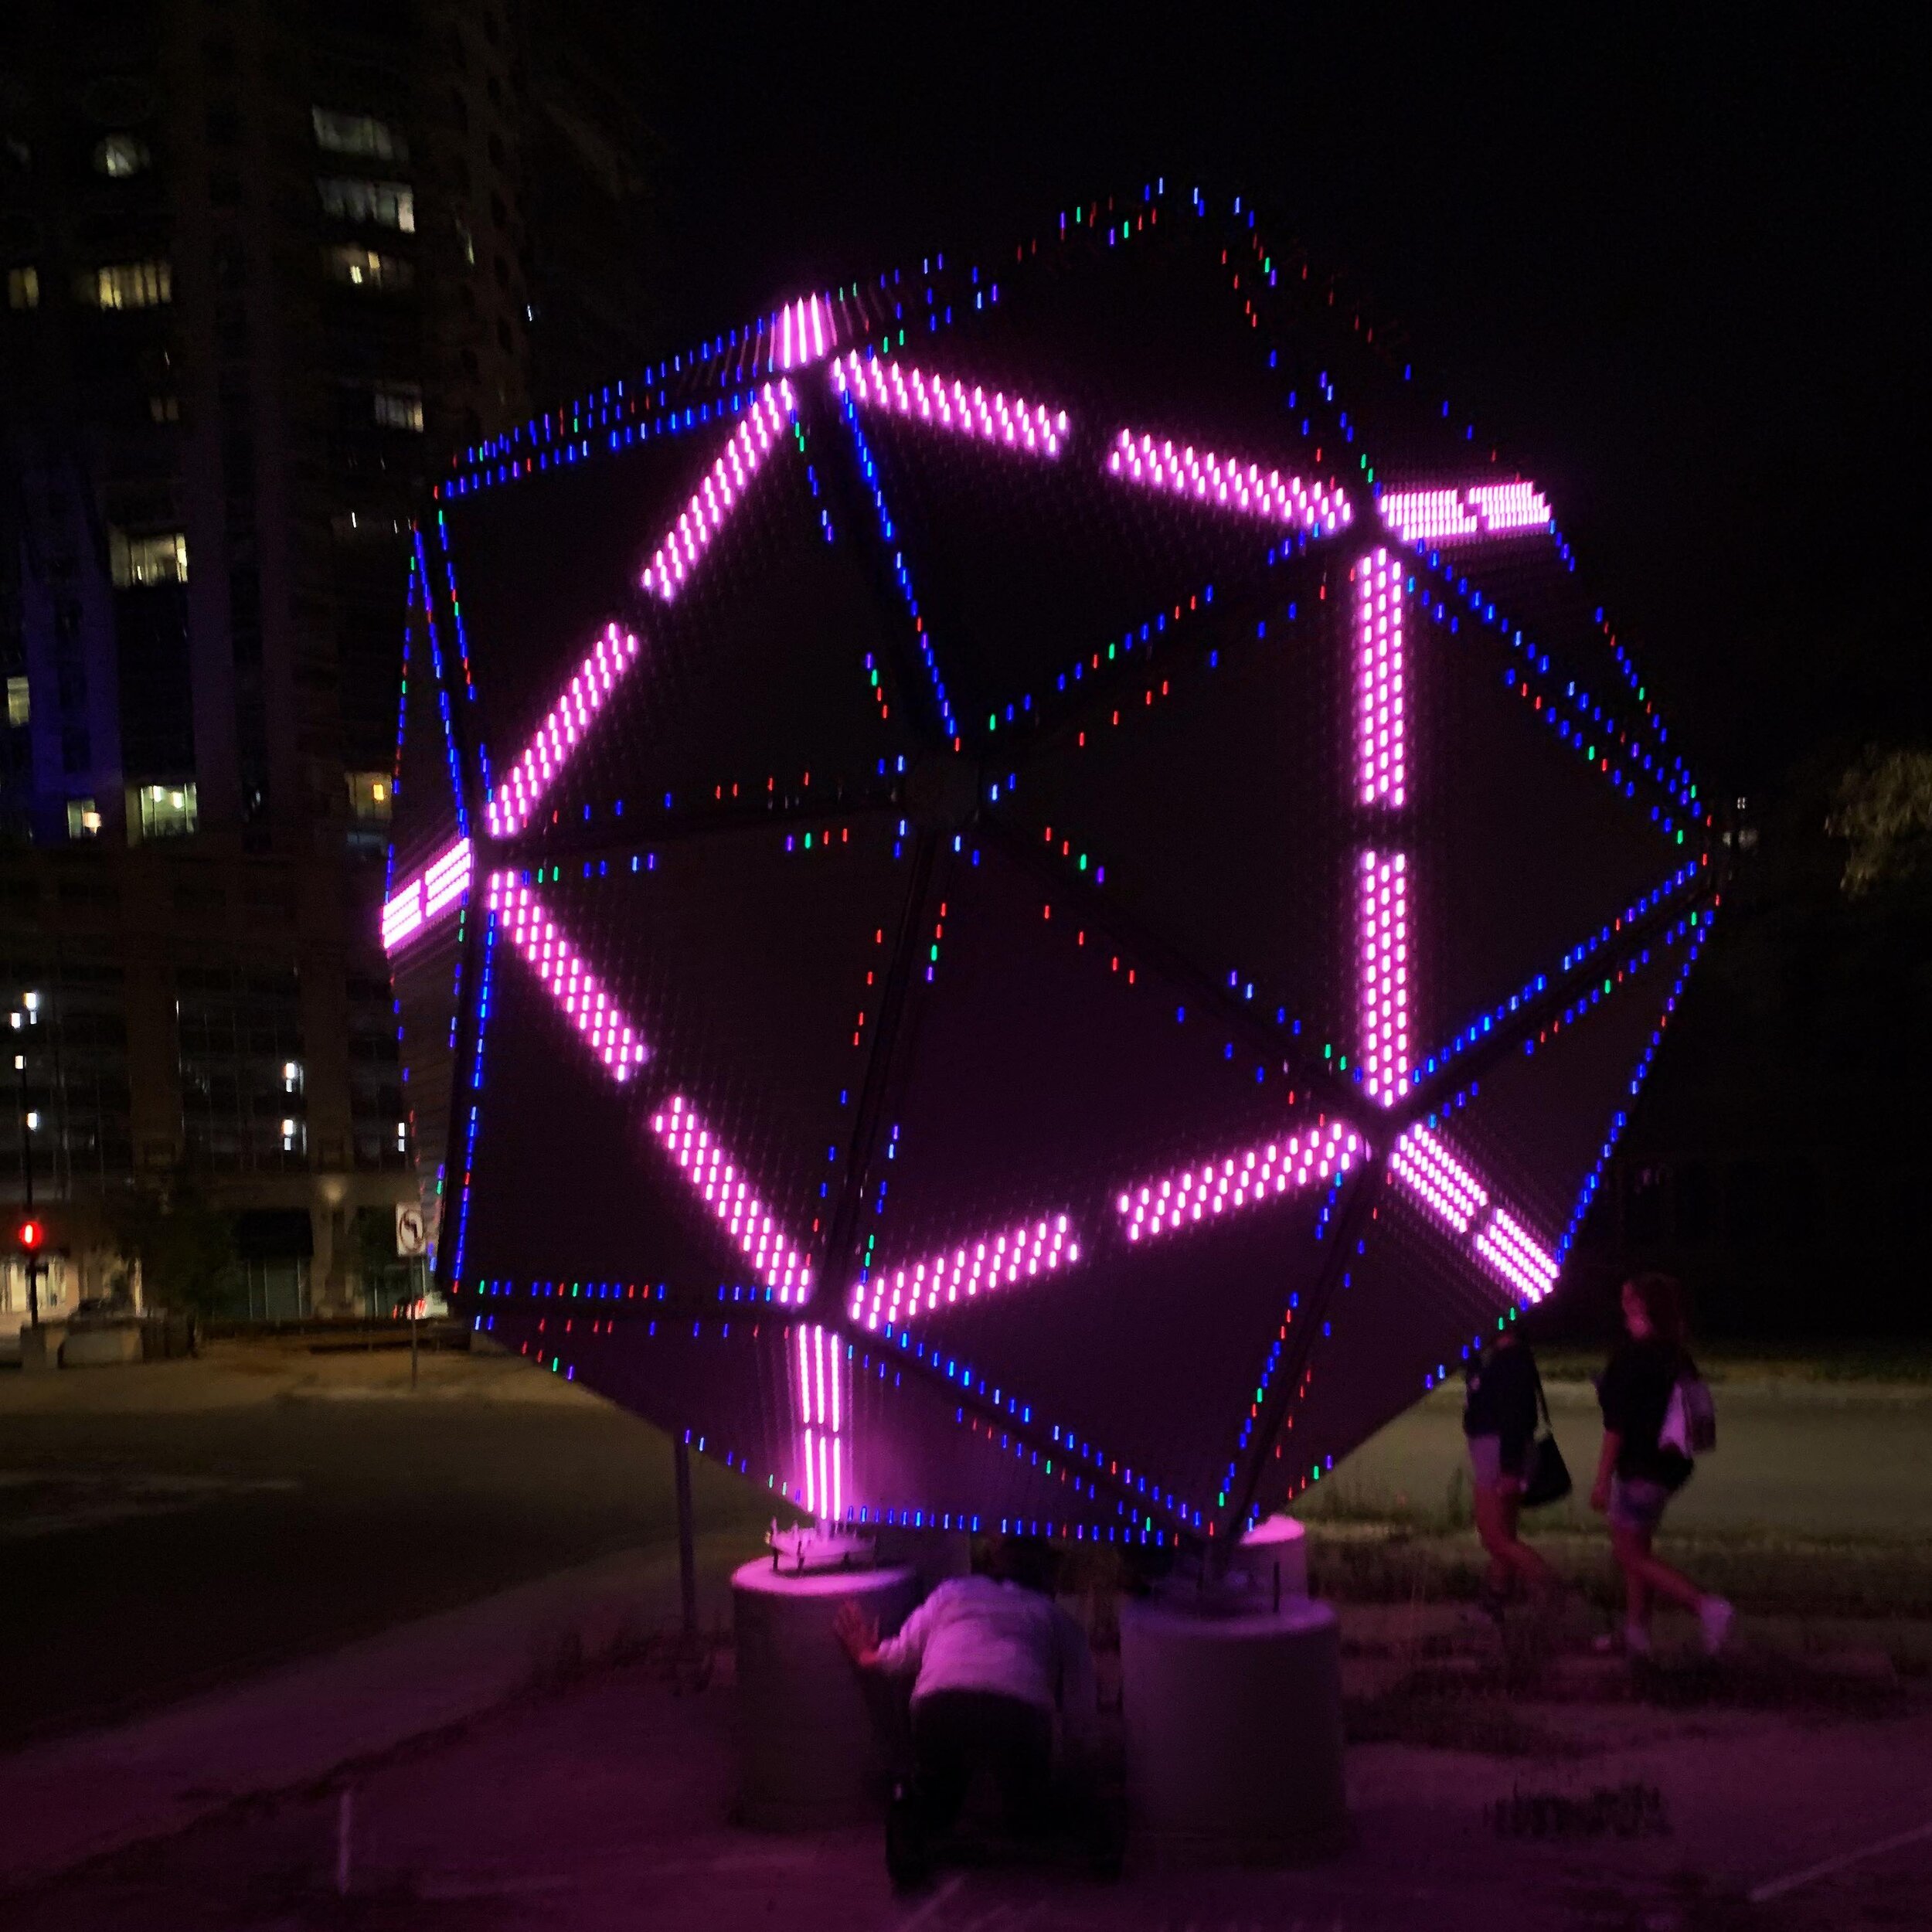 Friday, April 5 at sundown 🌅

Come see Clark&rsquo;s amazing Quadrivium sculpture as it lights up the intersection at E. 20th and Logan, Denver.

It is a contemporary masterwork to behold and an unforgettable experience.

For the back story, check o